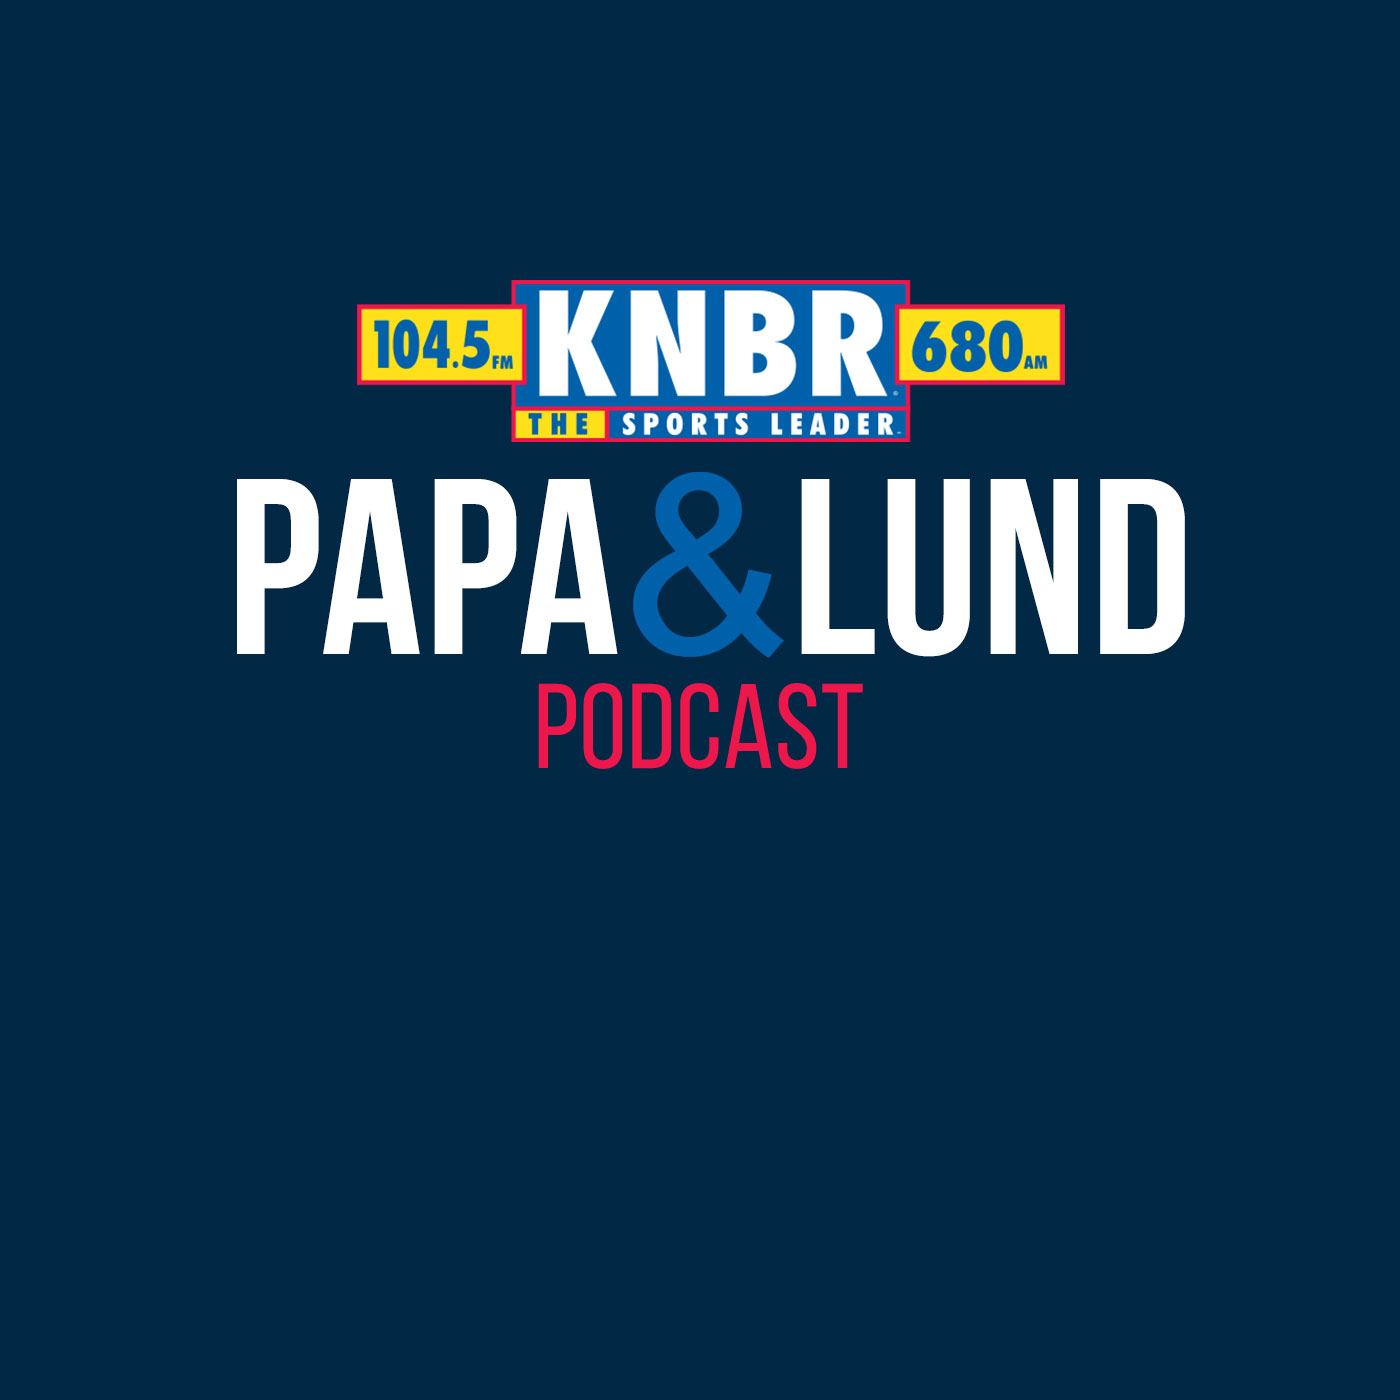 4-15 Bob Myers joins Papa & Lund to discuss the Warriors going into the Play-In against a familiar foe and how just making the Play-In is not enough for this Warriors team